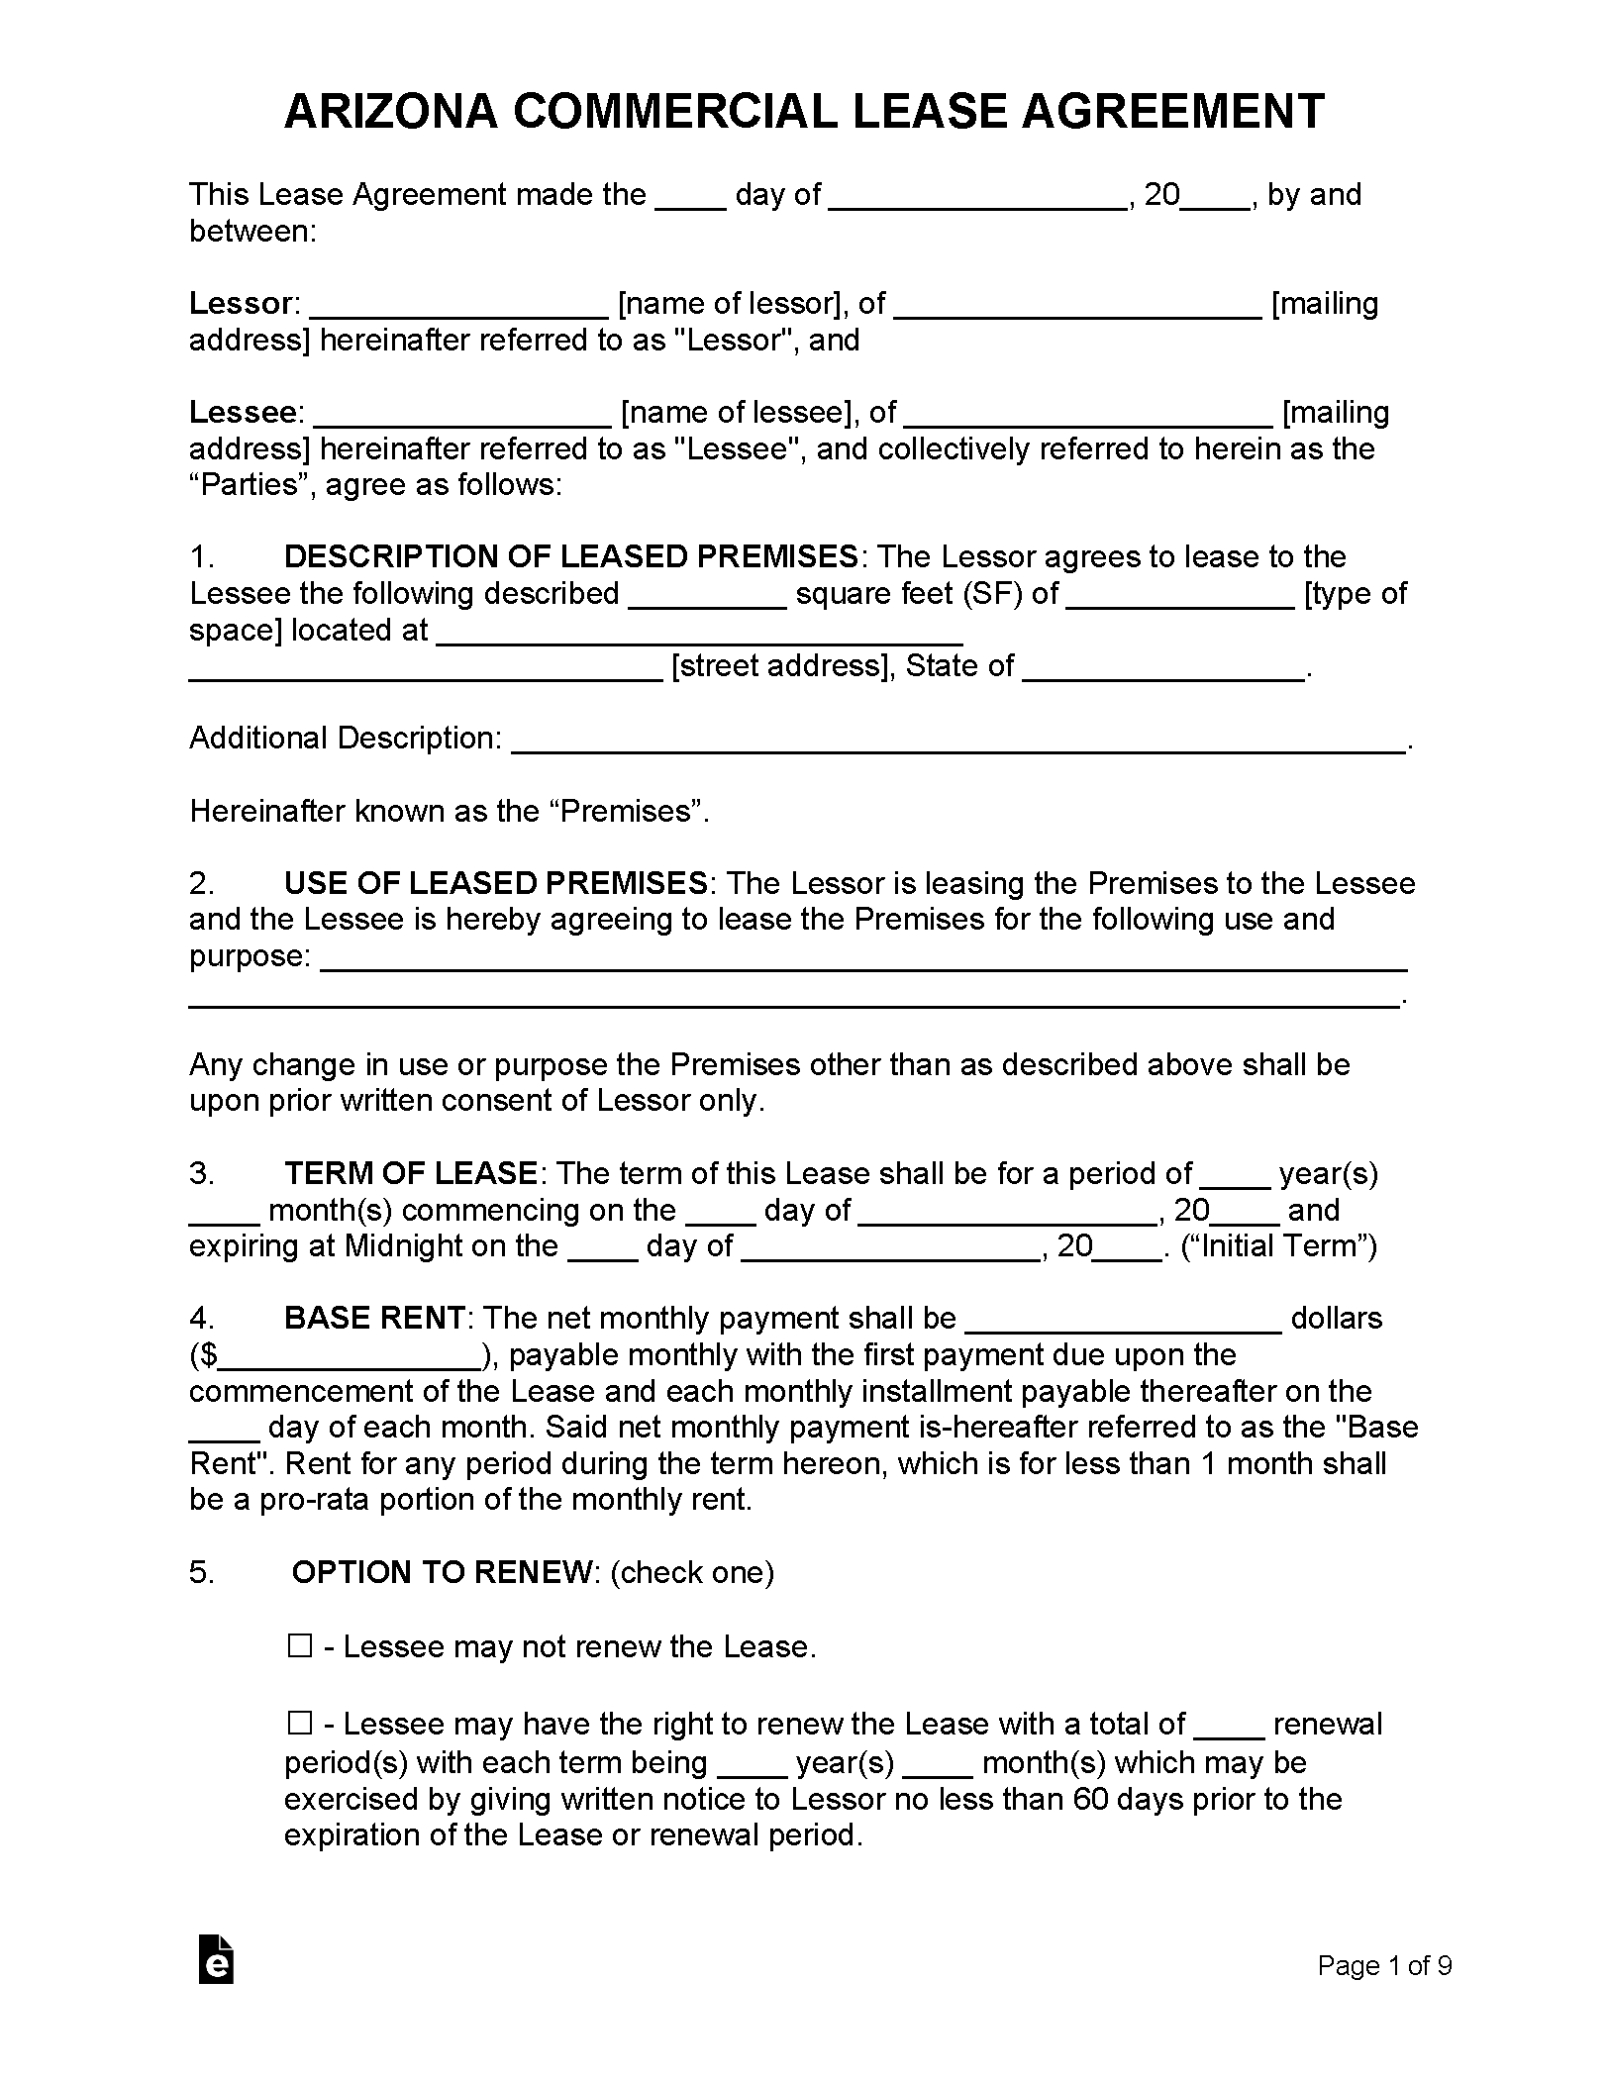 Free Arizona Commercial Lease Agreement Template | Pdf | Word regarding Business Lease Agreement Template Free